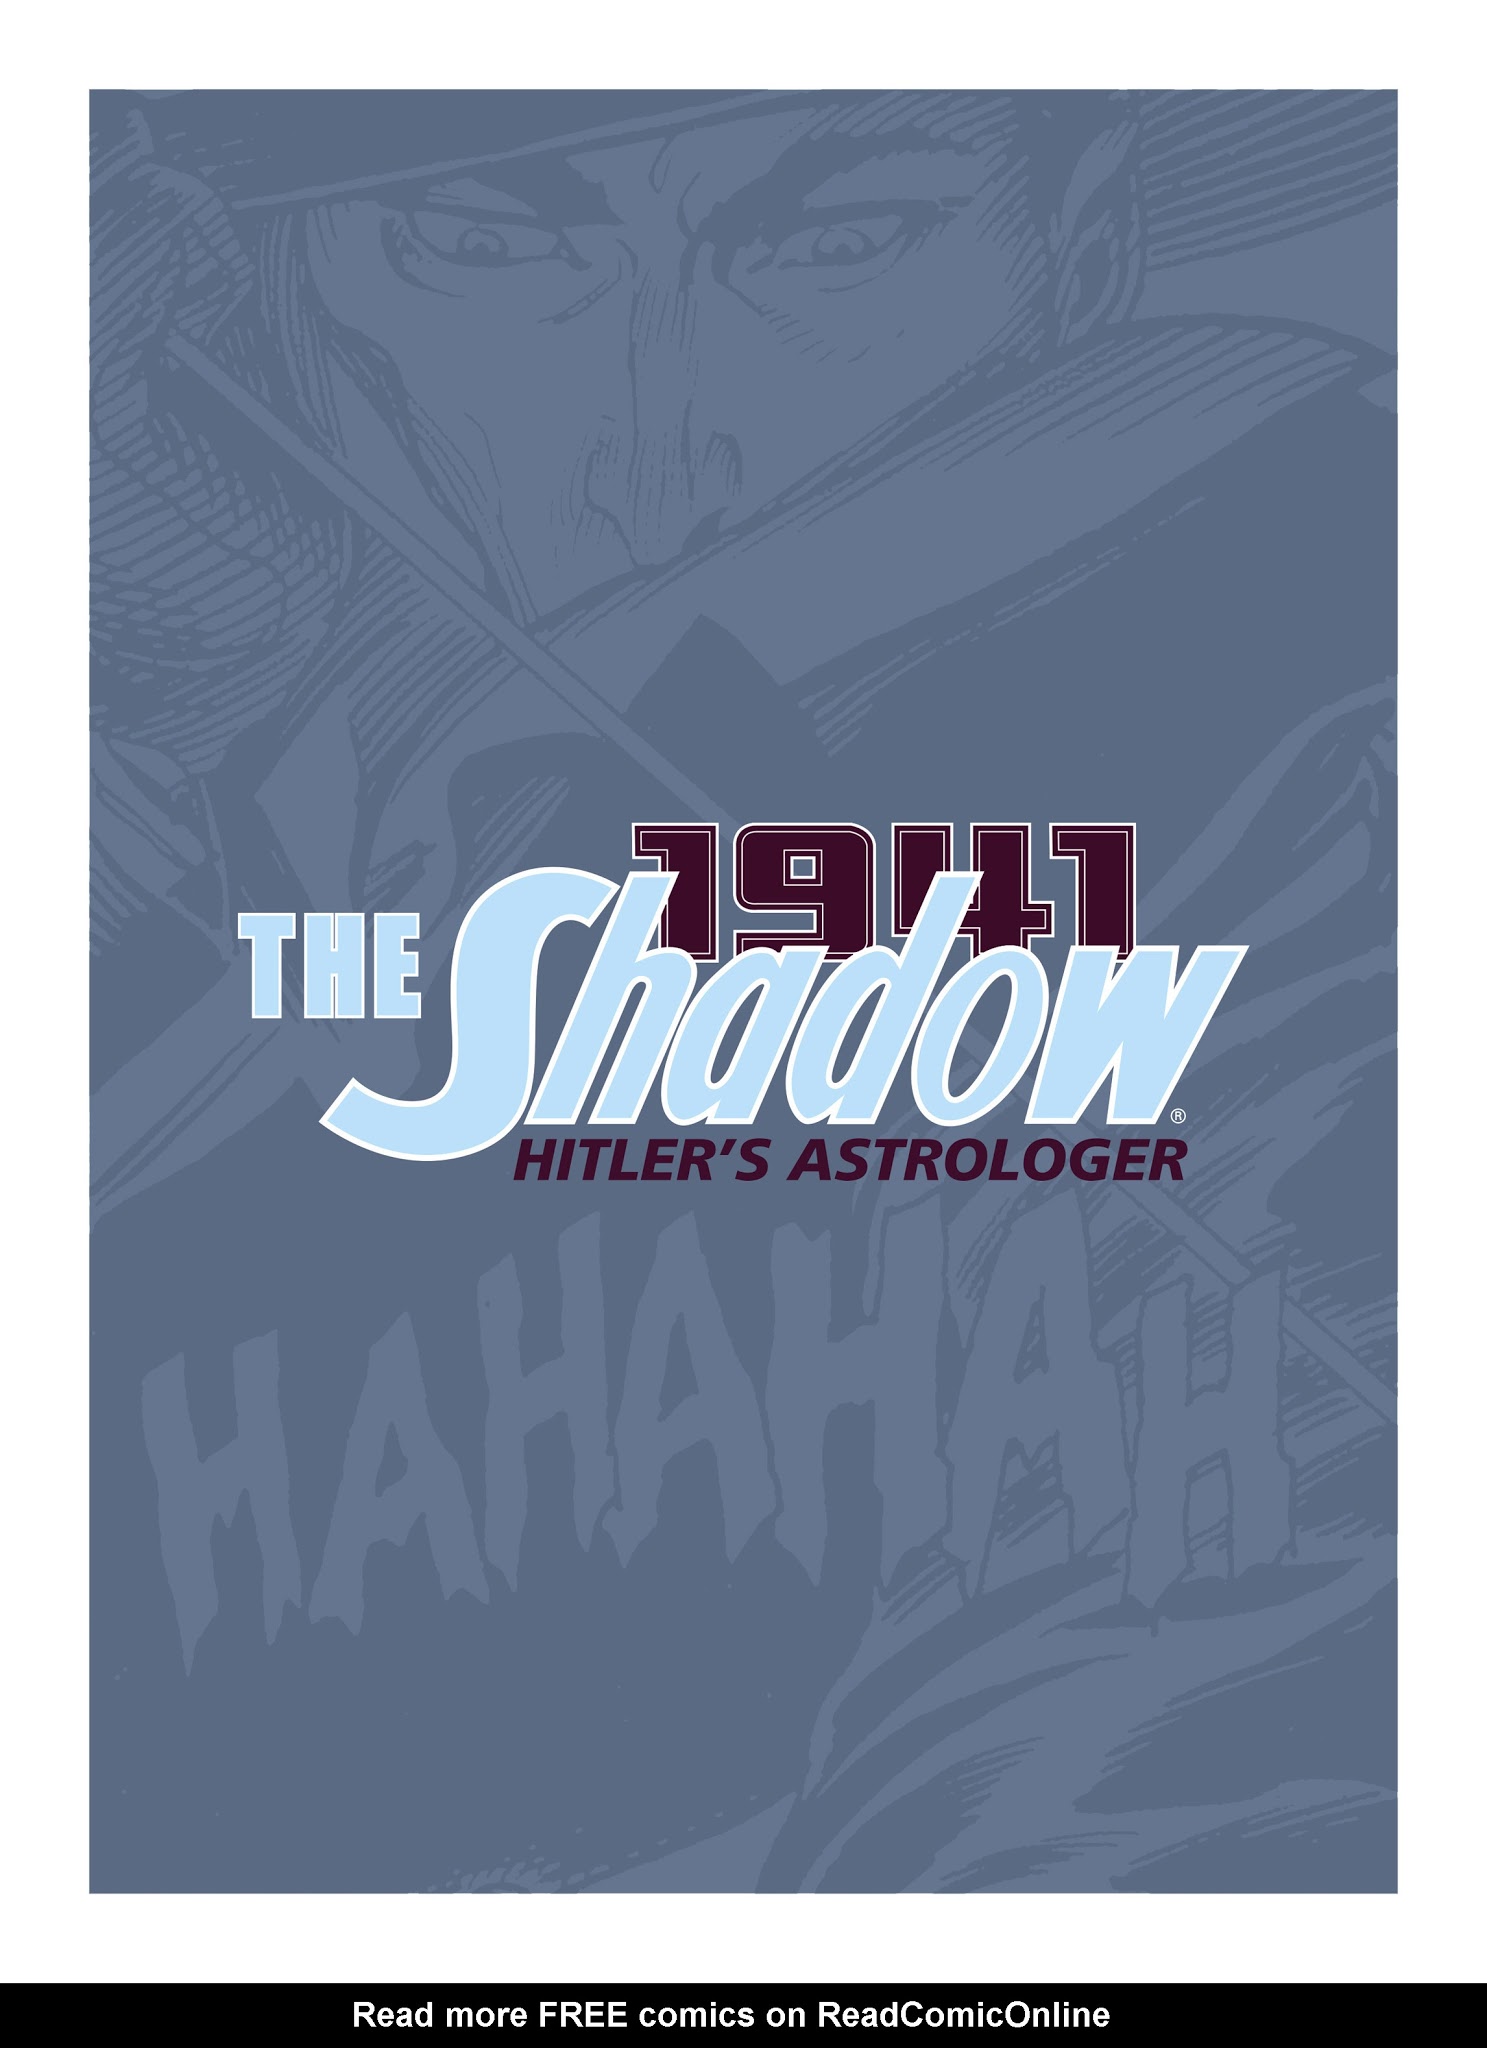 Read online The Shadow 1941: Hitler's Astrologer comic -  Issue # Full - 3